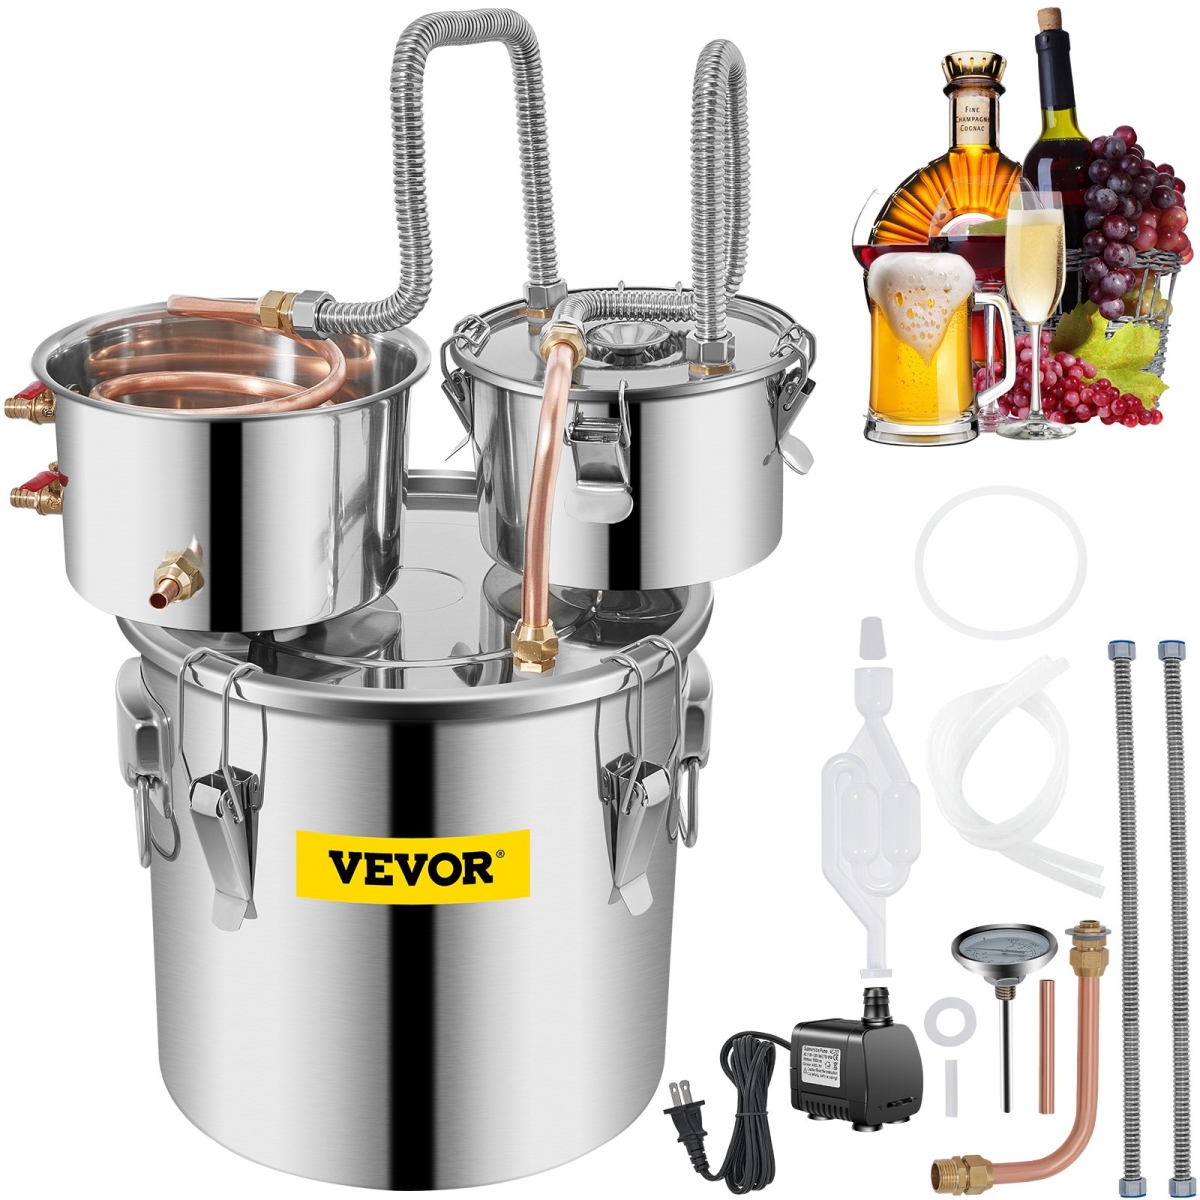 Picture of Vevor ZLSJ3GALSLNTZLQDBV1 3 gal Stainless Steel Alcohol Distiller with Copper Tube & Build-in Thermometer & Water Pump